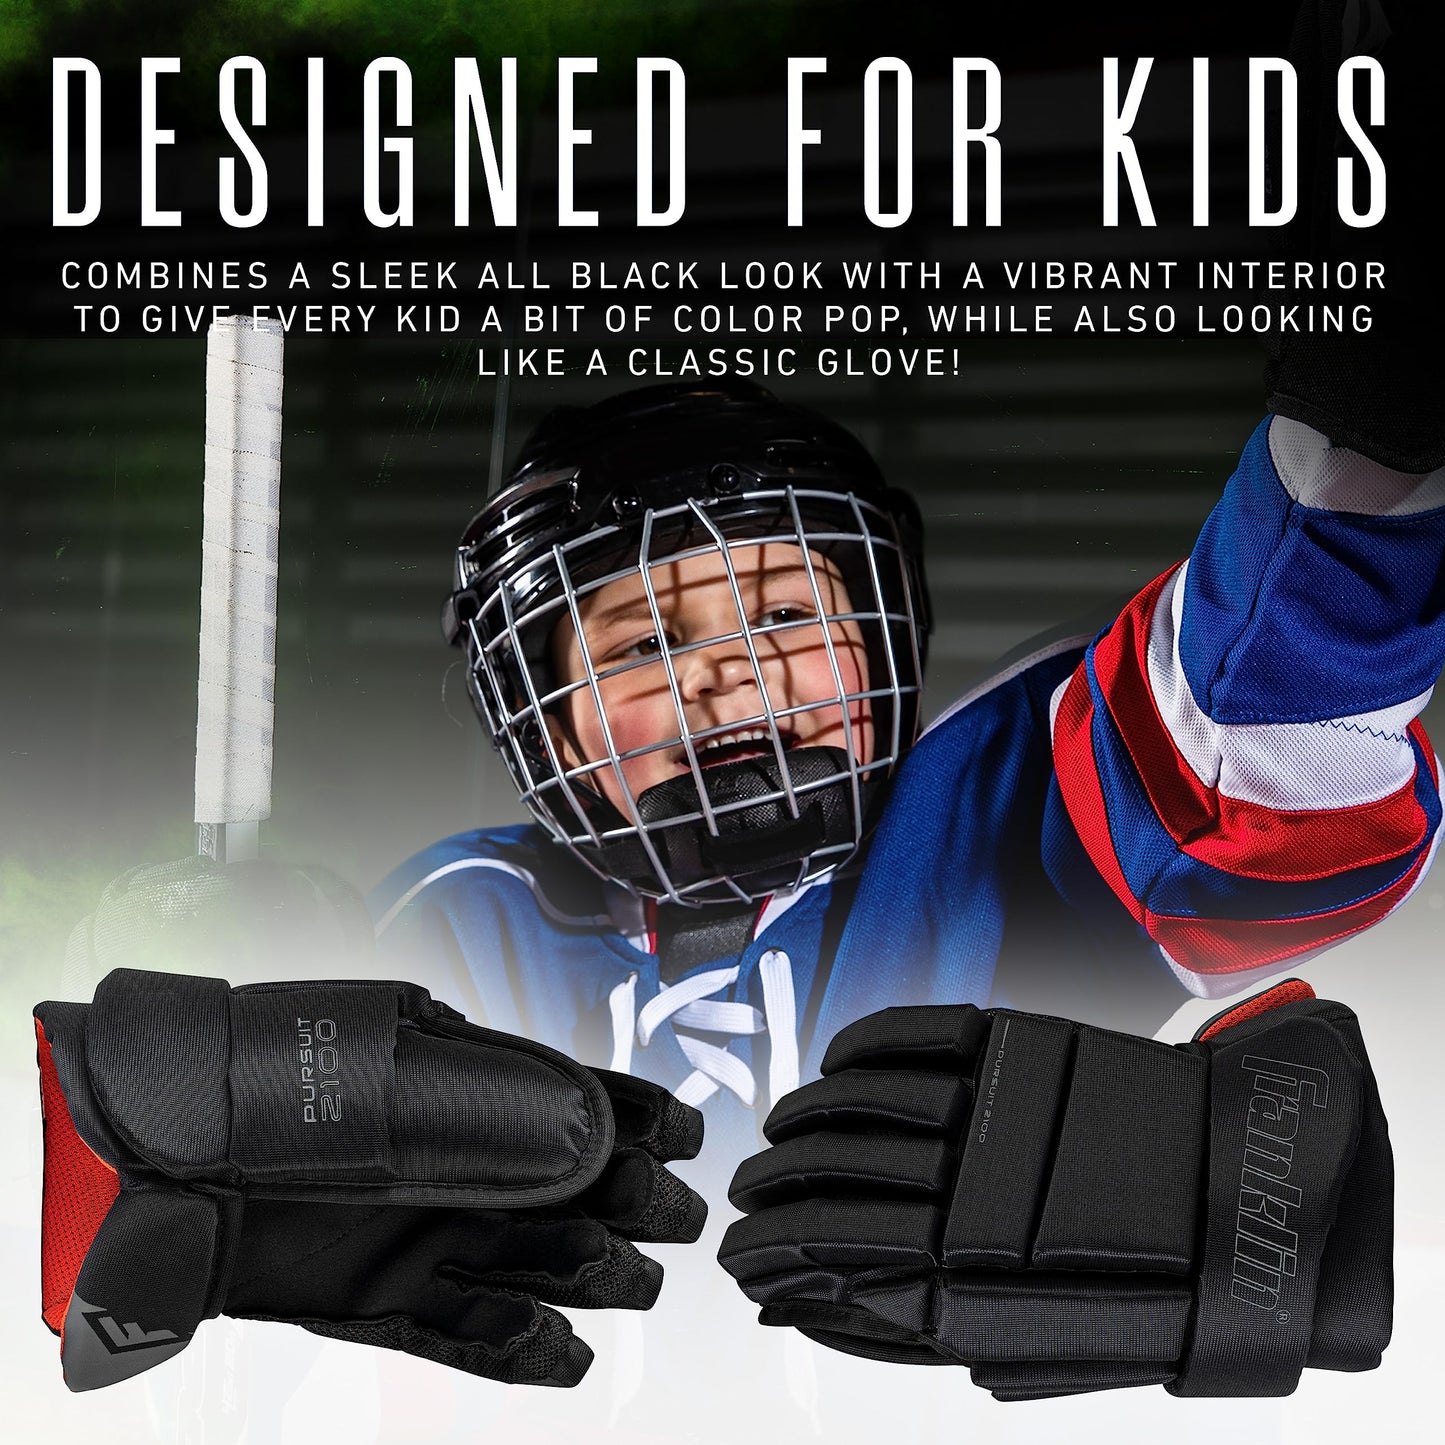 Franklin Sports Ice Hockey Gloves - 10" Youth Gloves - Thumb Lock System - Flexible Full Motion Cuff - Perfect for Kids!